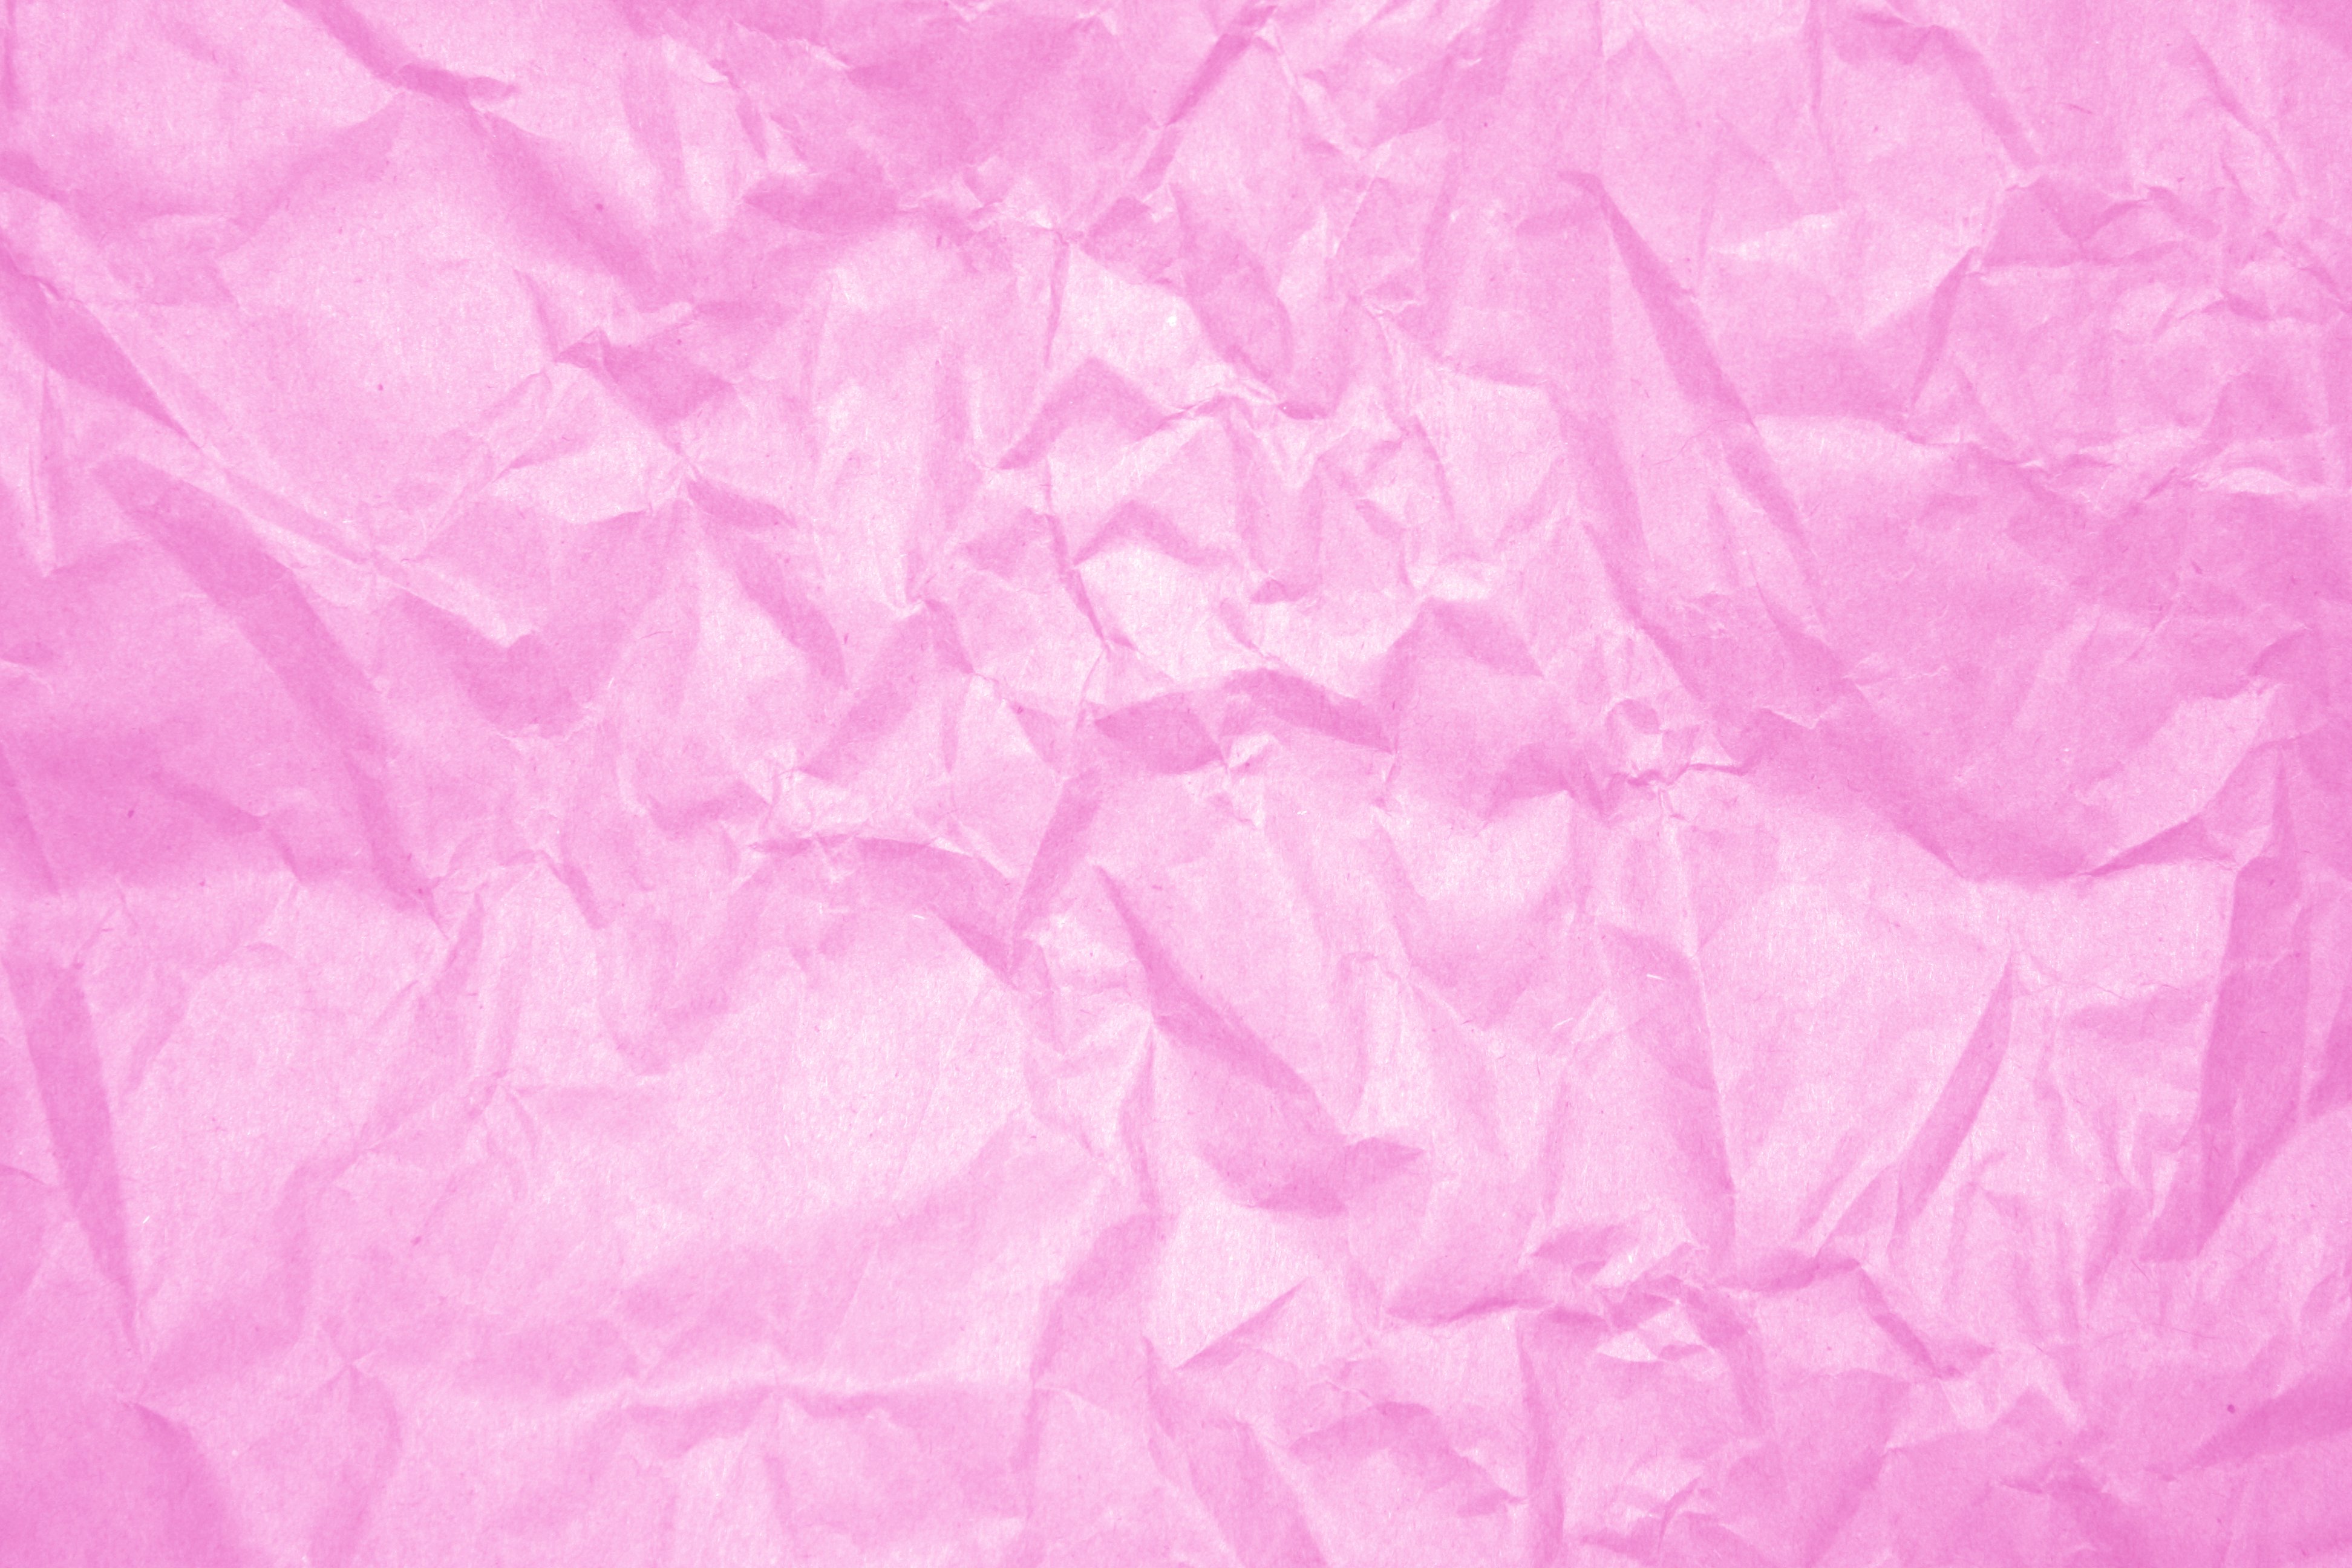 Crumpled Pink Paper Texture Picture, Free Photograph